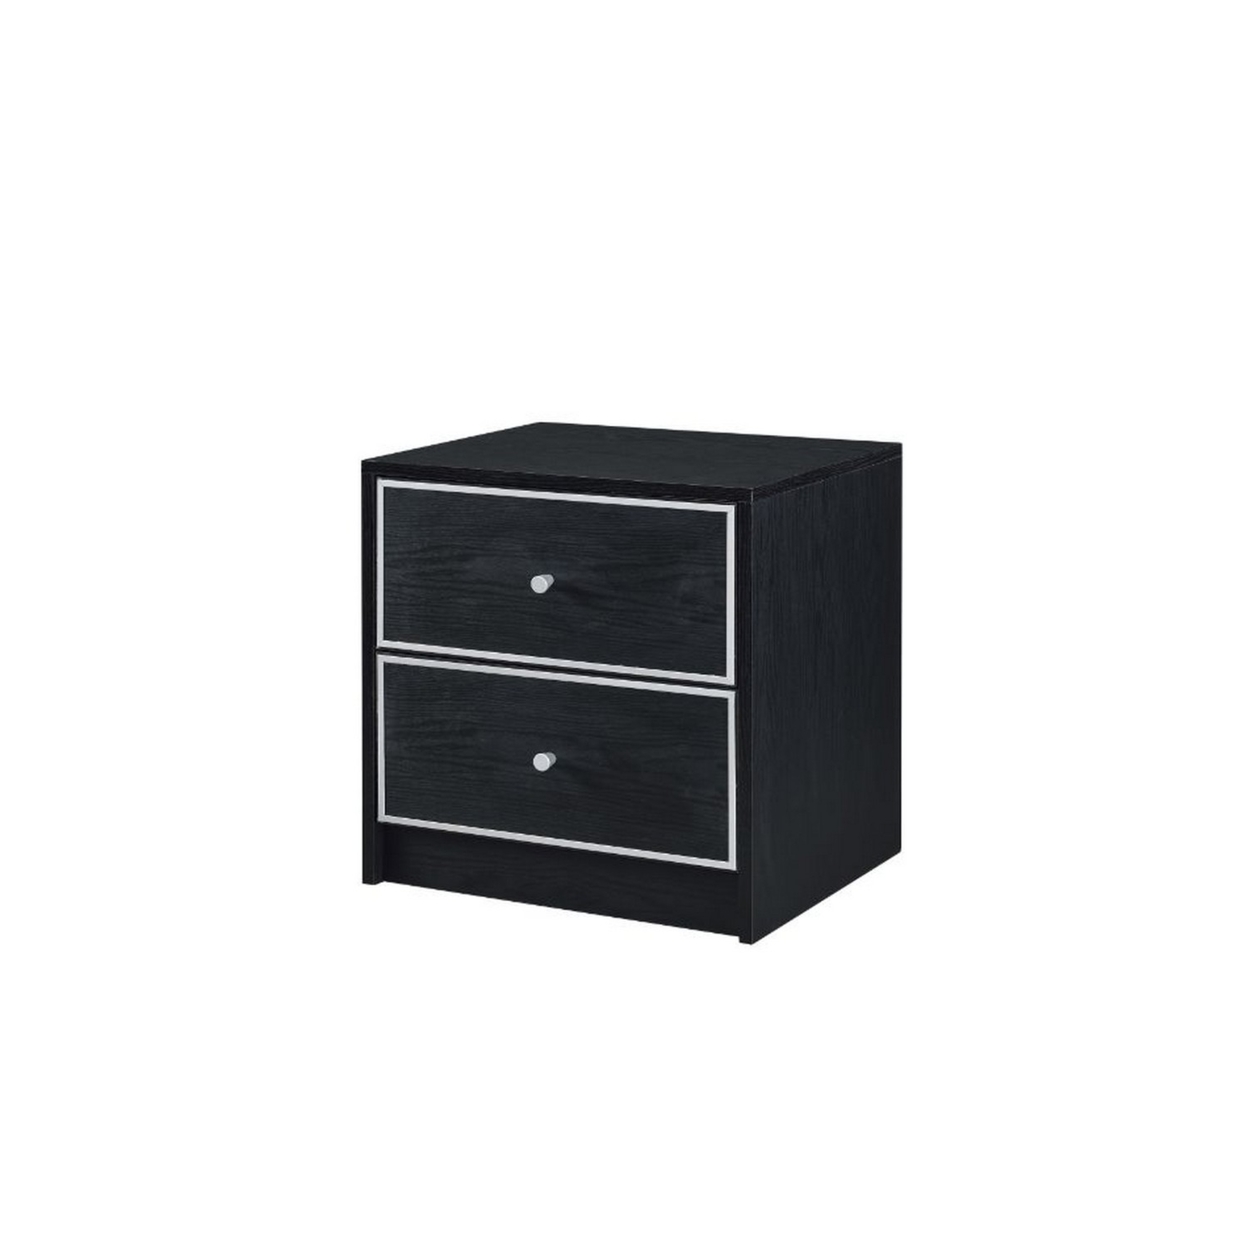 Accent Table With 2 Storage Drawers And Intricate Trimming, Black- Saltoro Sherpi